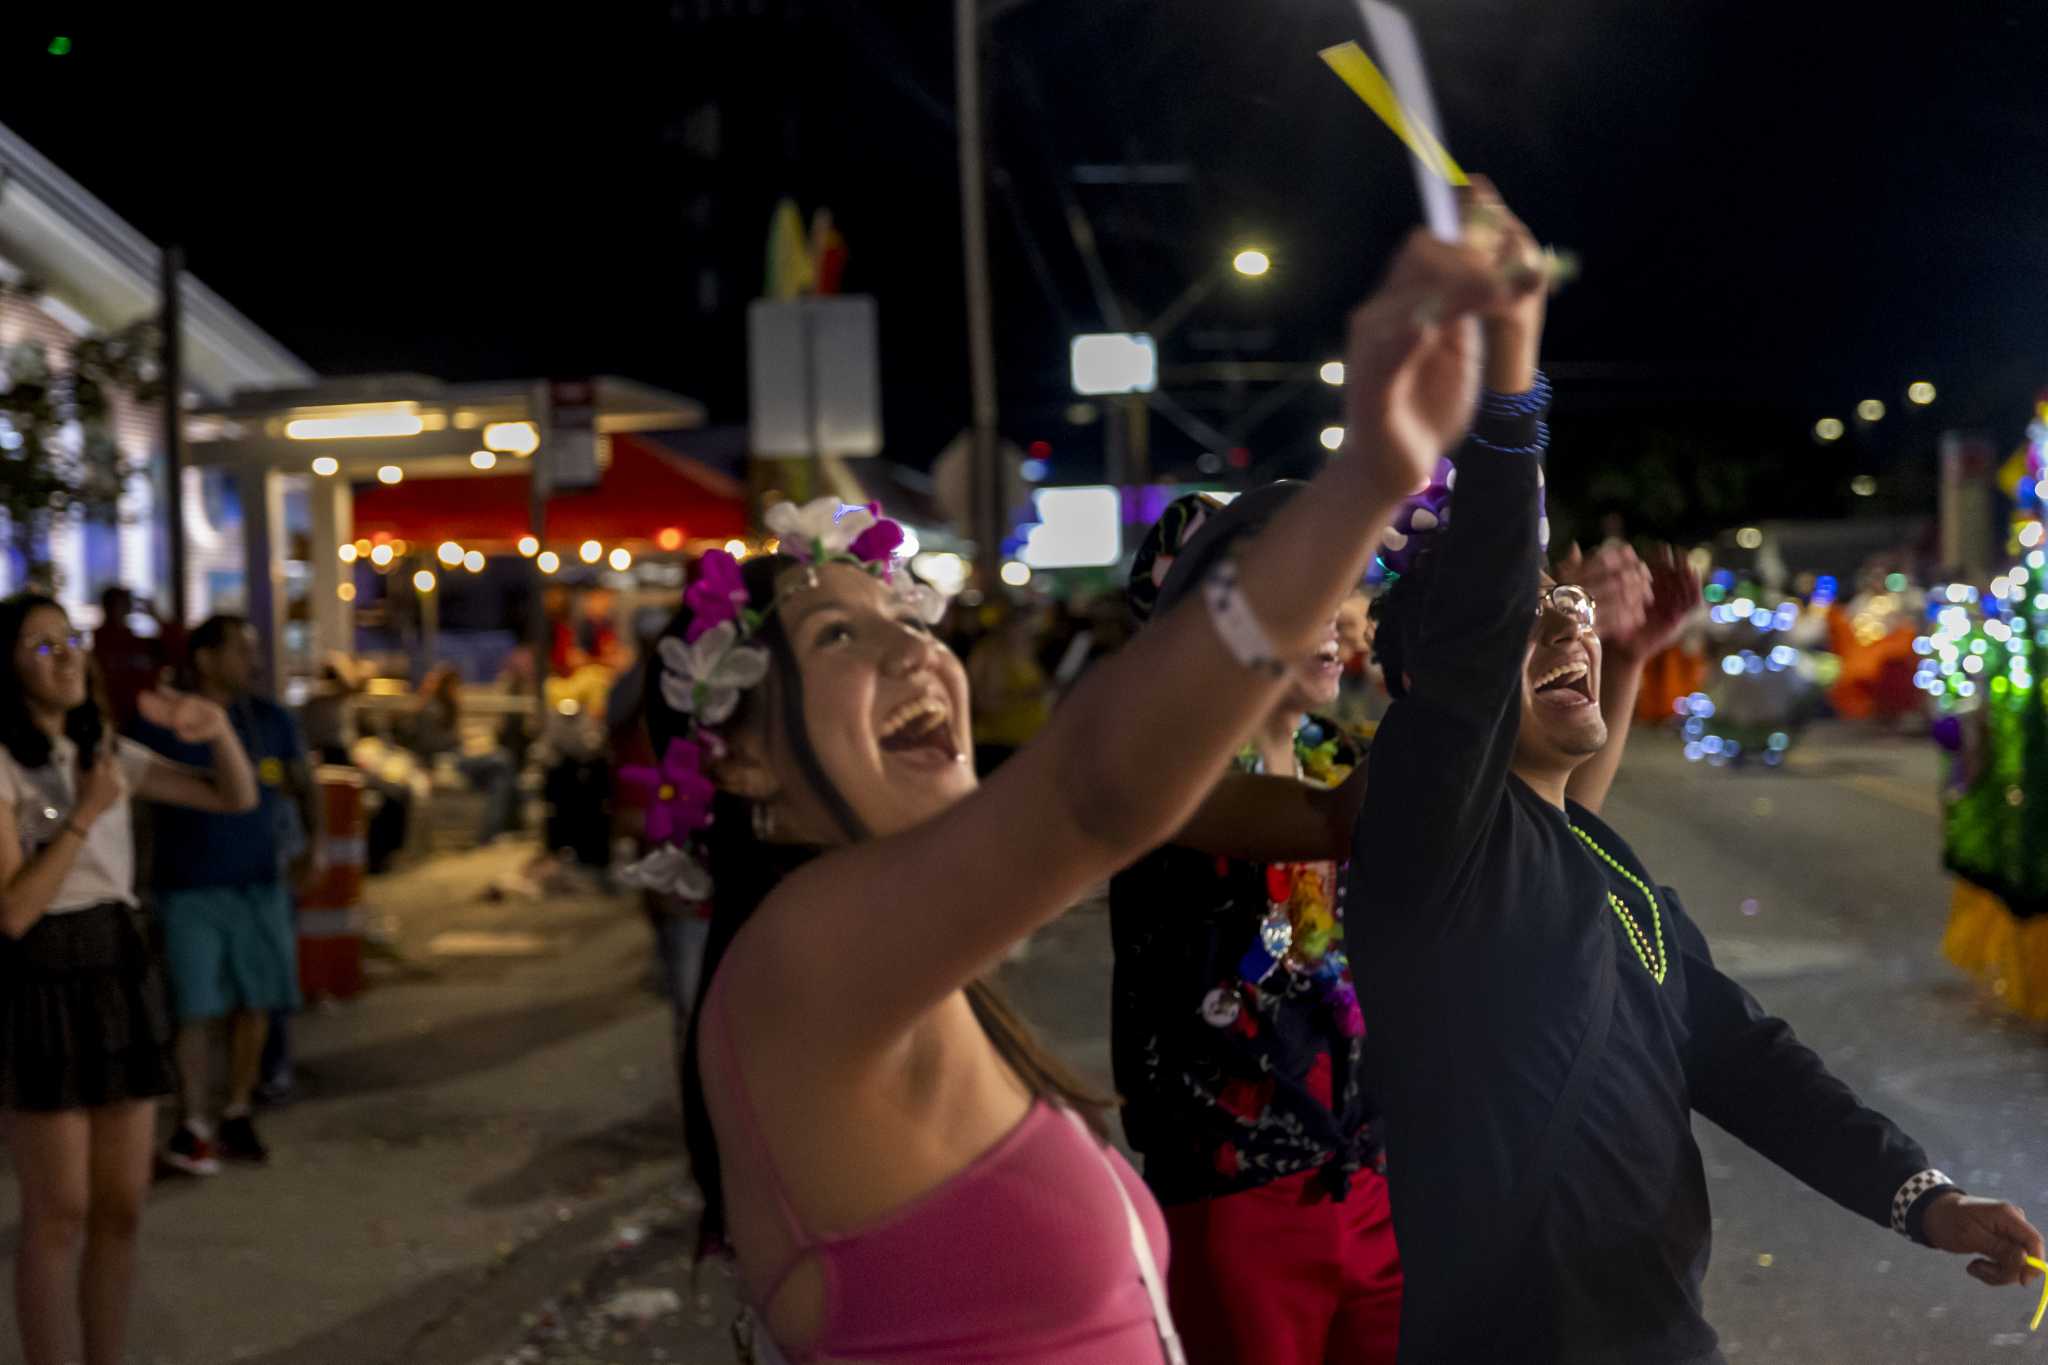 Fiesta San Antonio: Everything You Need To Know About The 'Party